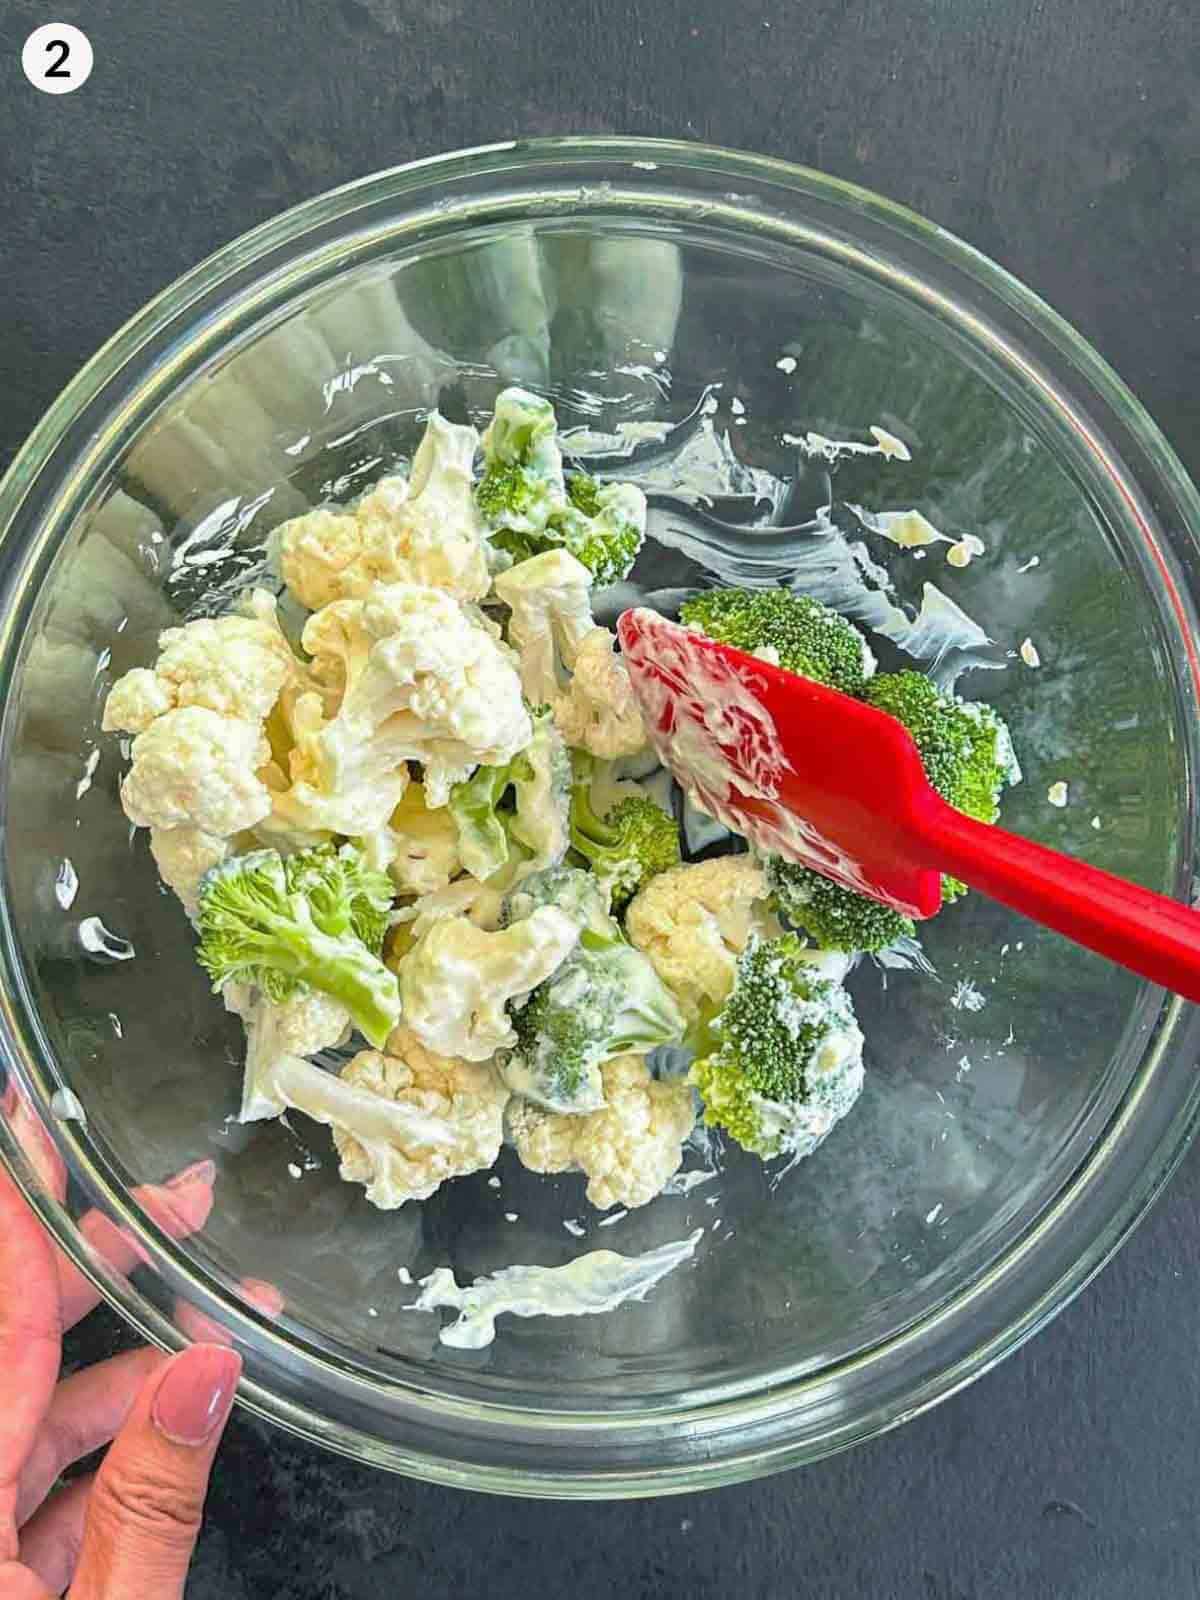 Mixing broccoli and cauliflower florets with mayonnaise in a glass bowl with a red spatula